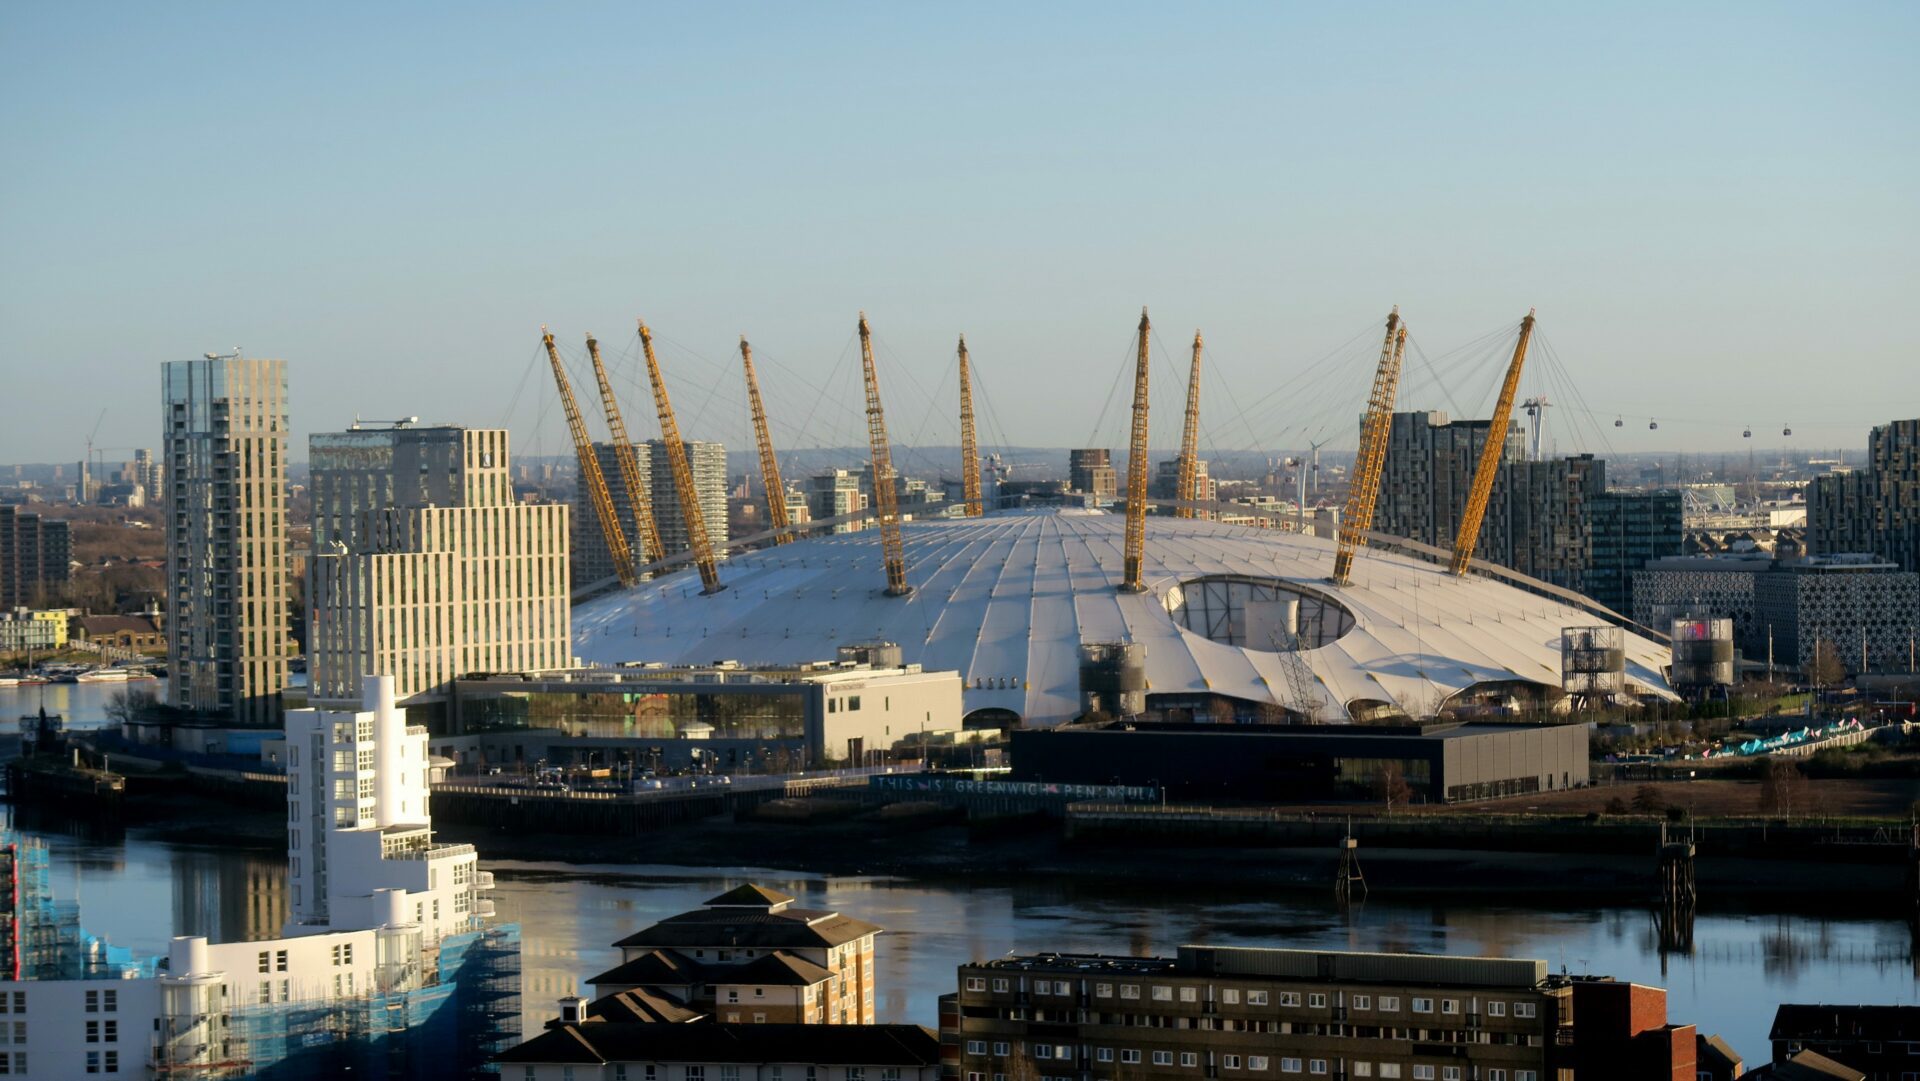 View of the city of London with O2 Arena as the focal point of the image